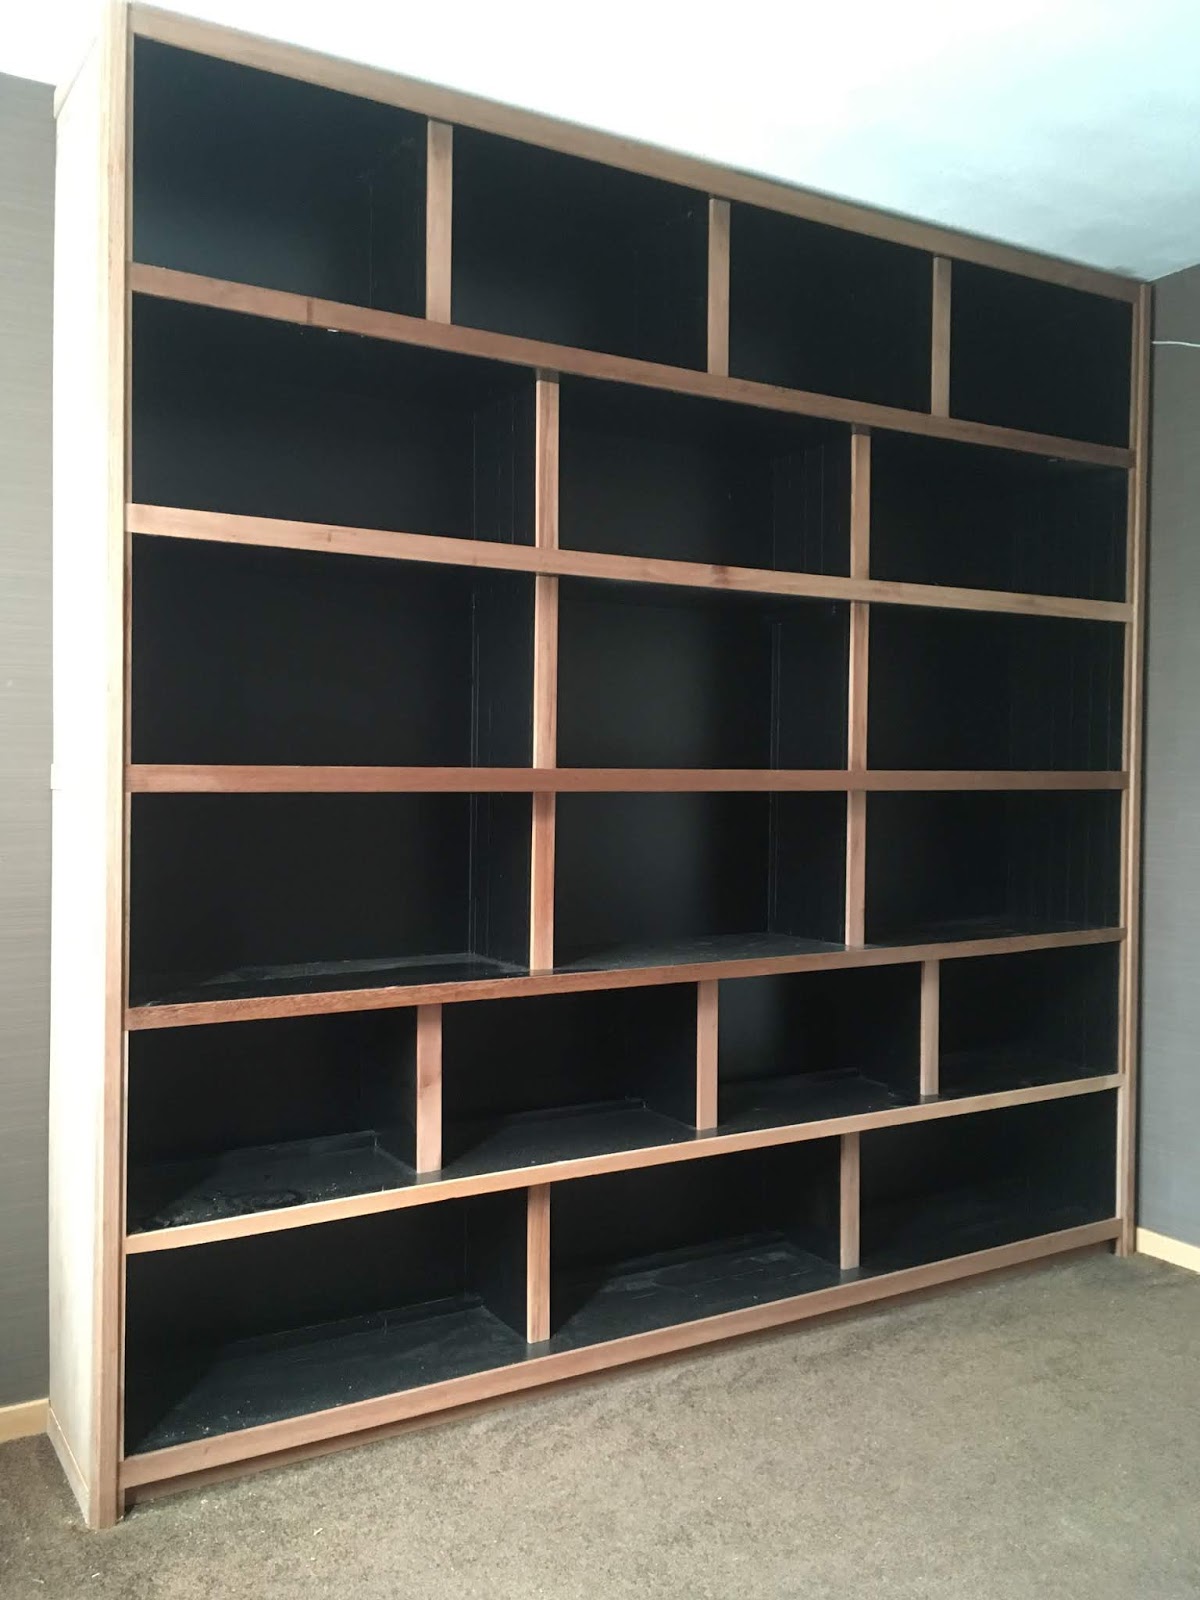 The bookshelf finished, ready to be rinsed and filled with books